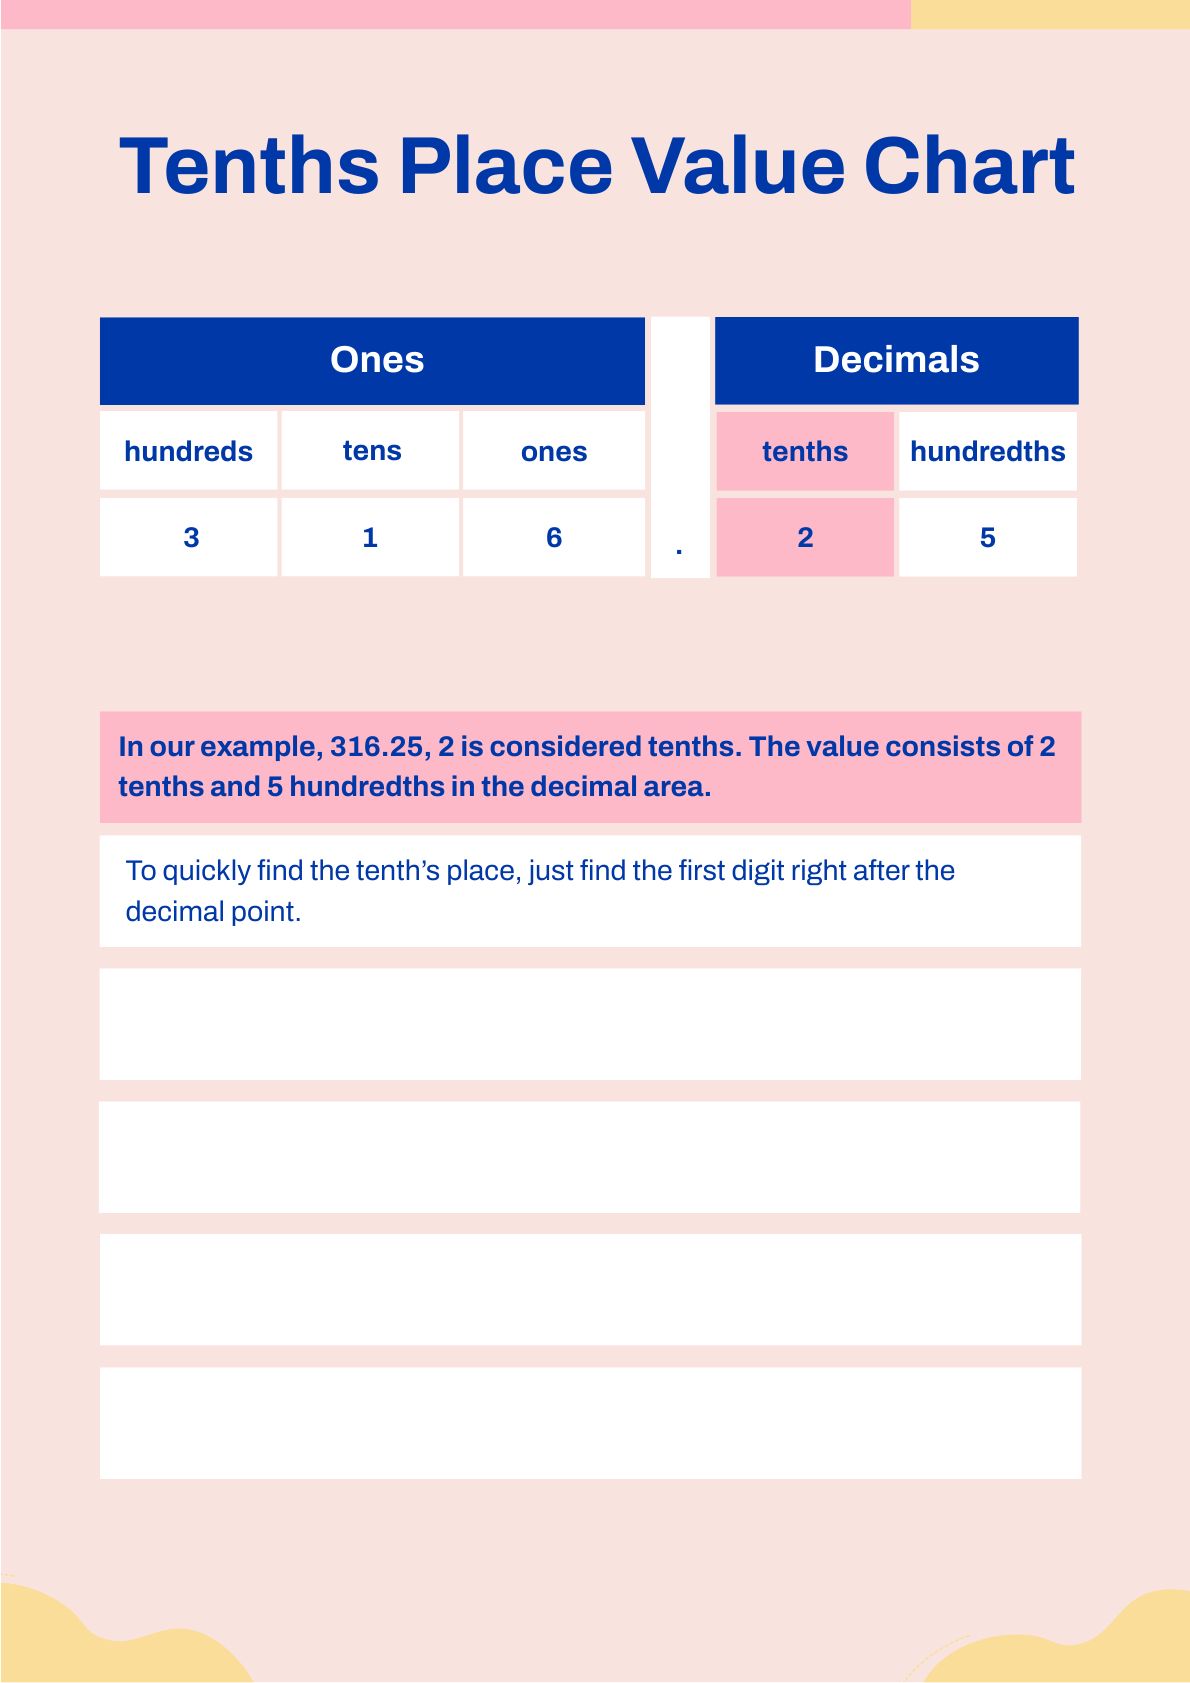 Free Tenths Place Value Chart in PDF, Illustrator